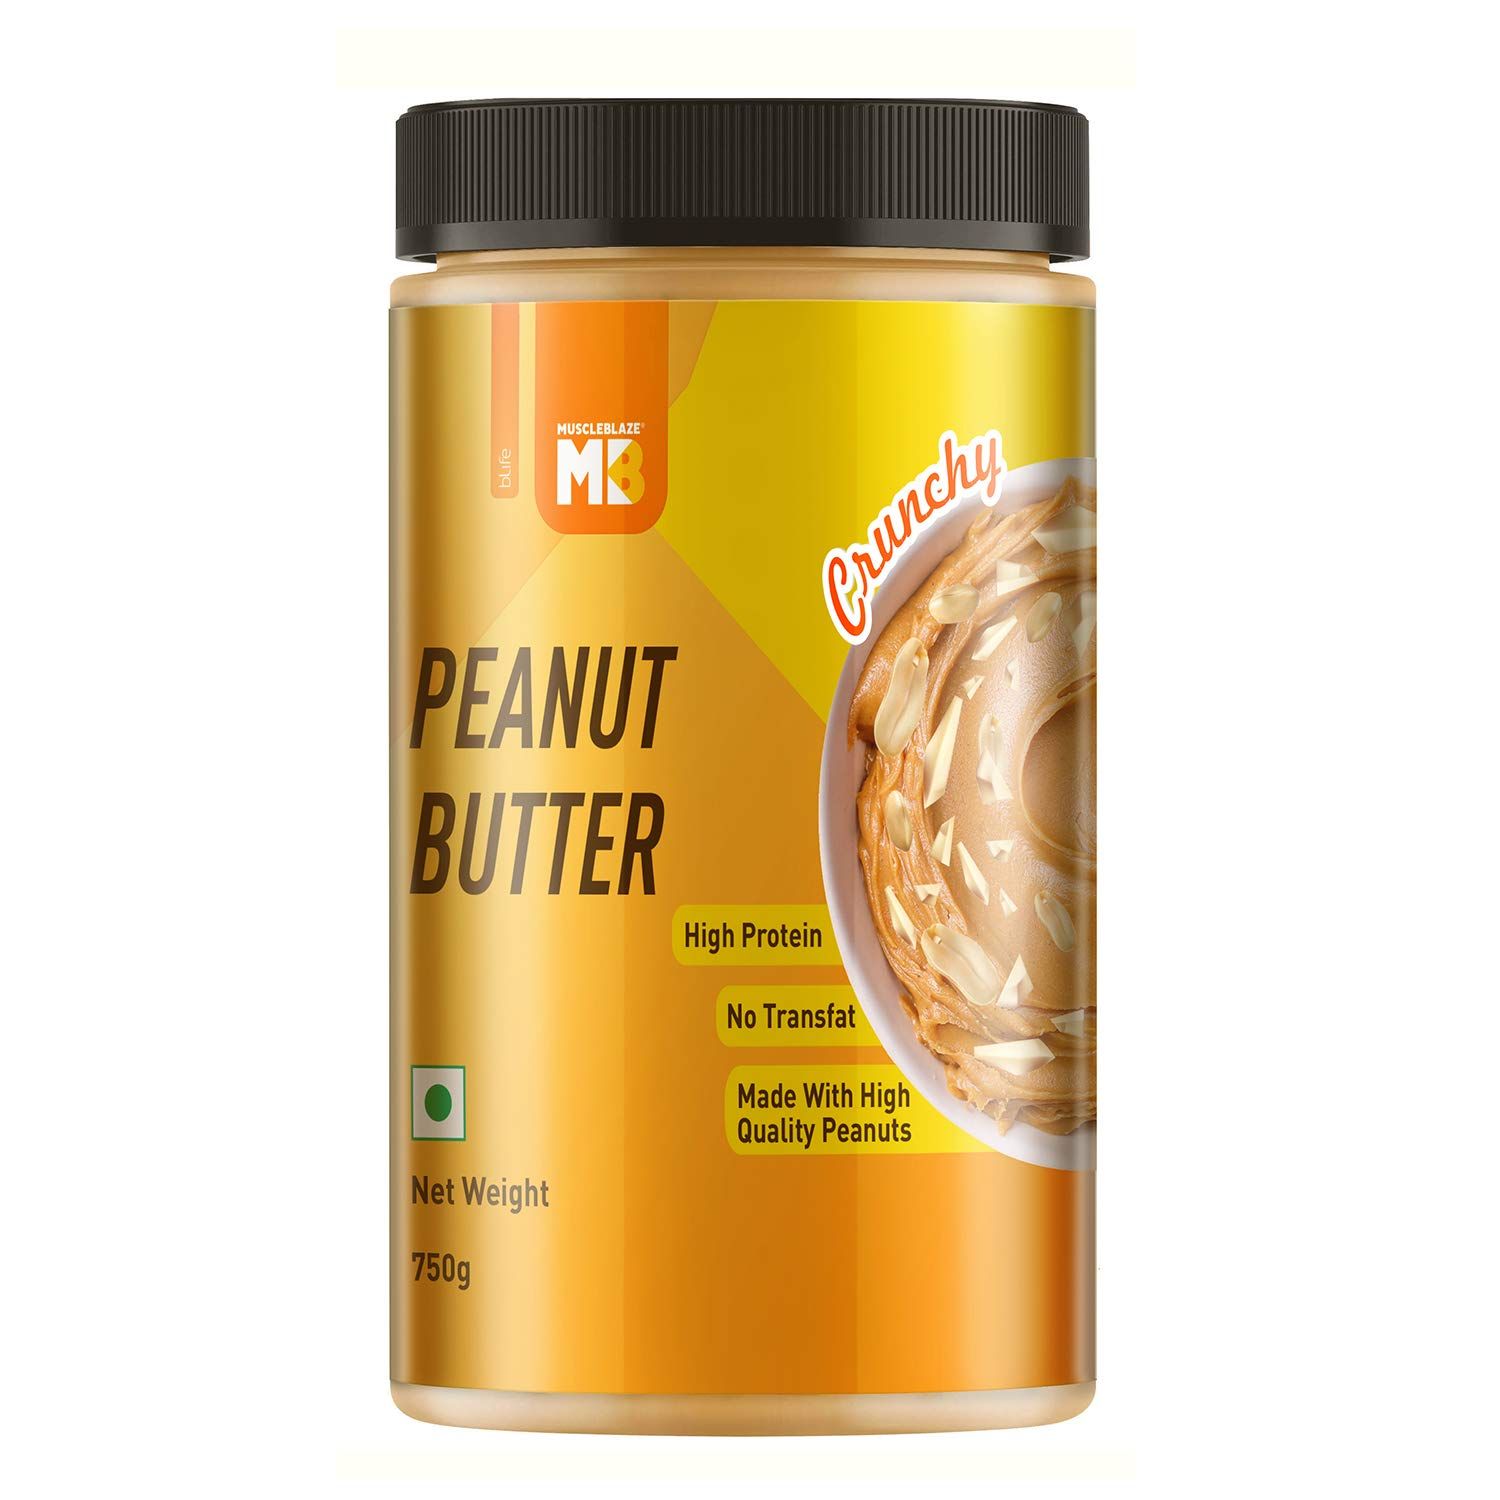 Muscleblaze Peanut Butter with Added Omega, Crunchy Image